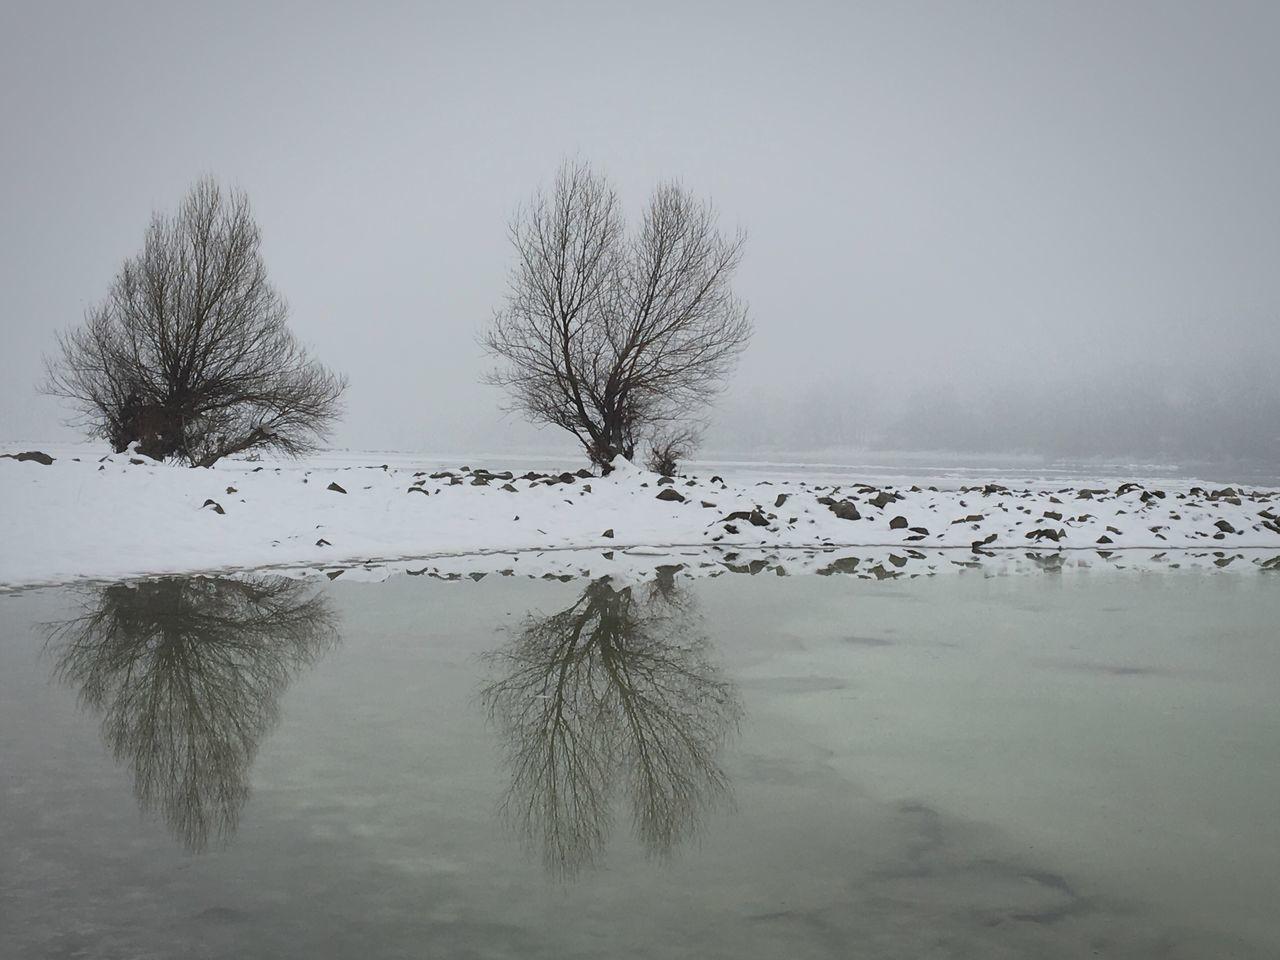 winter, snow, cold temperature, tree, freezing, water, nature, morning, mist, sky, tranquility, scenics - nature, beauty in nature, plant, environment, no people, tranquil scene, frost, fog, frozen, landscape, ice, land, bare tree, lake, non-urban scene, day, outdoors, monochrome, black and white, reflection, branch, animal